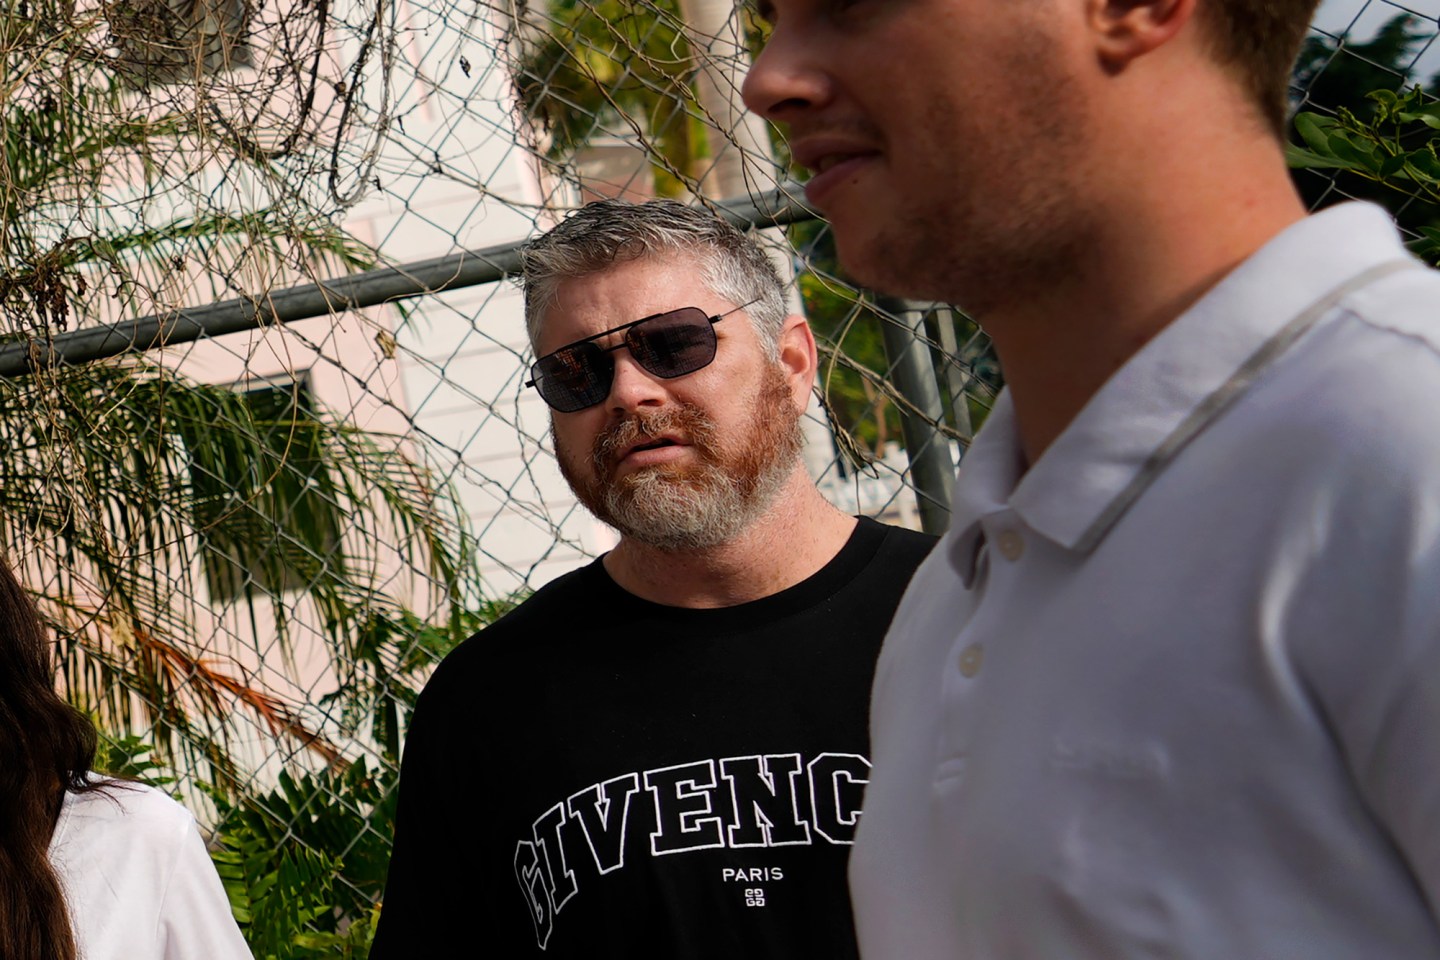 A group of crypto enthusiasts, including influencer Ben Armstrong, second right, known as &#8220;BitBoy Crypto,&#8221; wait to enter Magistrate Court to see a scheduled appearance by FTX founder Sam Bankman-Fried, in Nassau, Bahamas, Monday, Dec. 19, 2022. Armstrong, who traveled to the Bahamas with a group that included investors who lost their life savings, said he wants to see Bankman-Fried &#8220;face the music.&#8221; (AP Photo/Rebecca Blackwell)